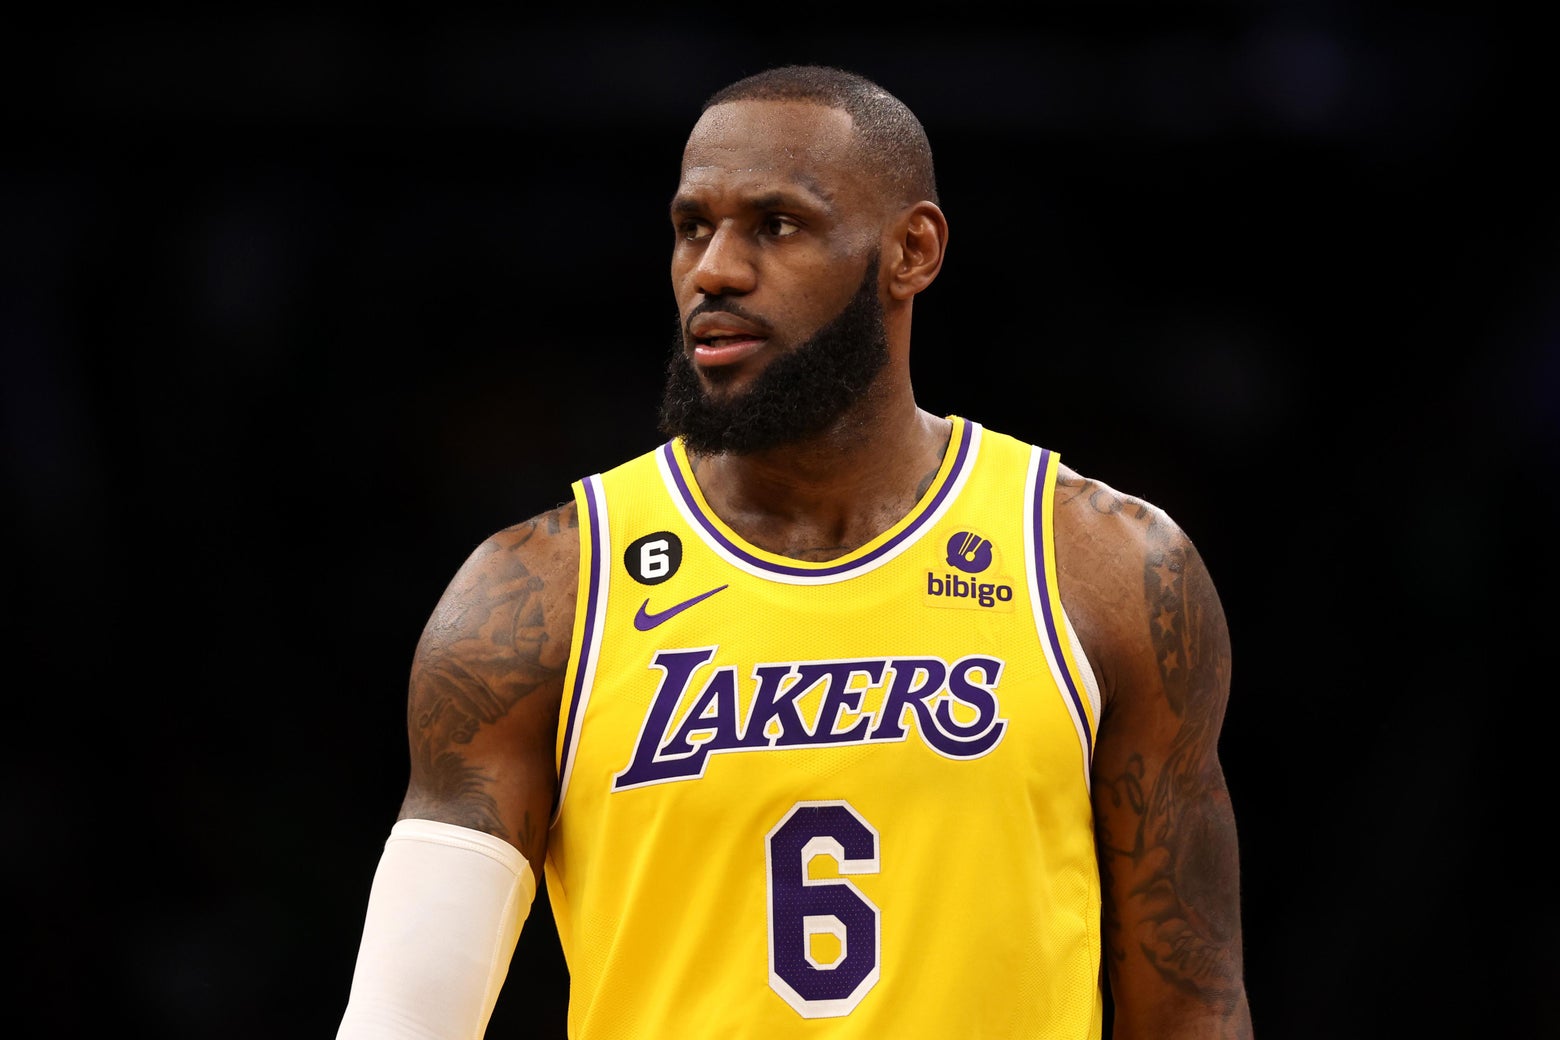 LA Insider: Lakers Should Trade LeBron James After Latest Comments